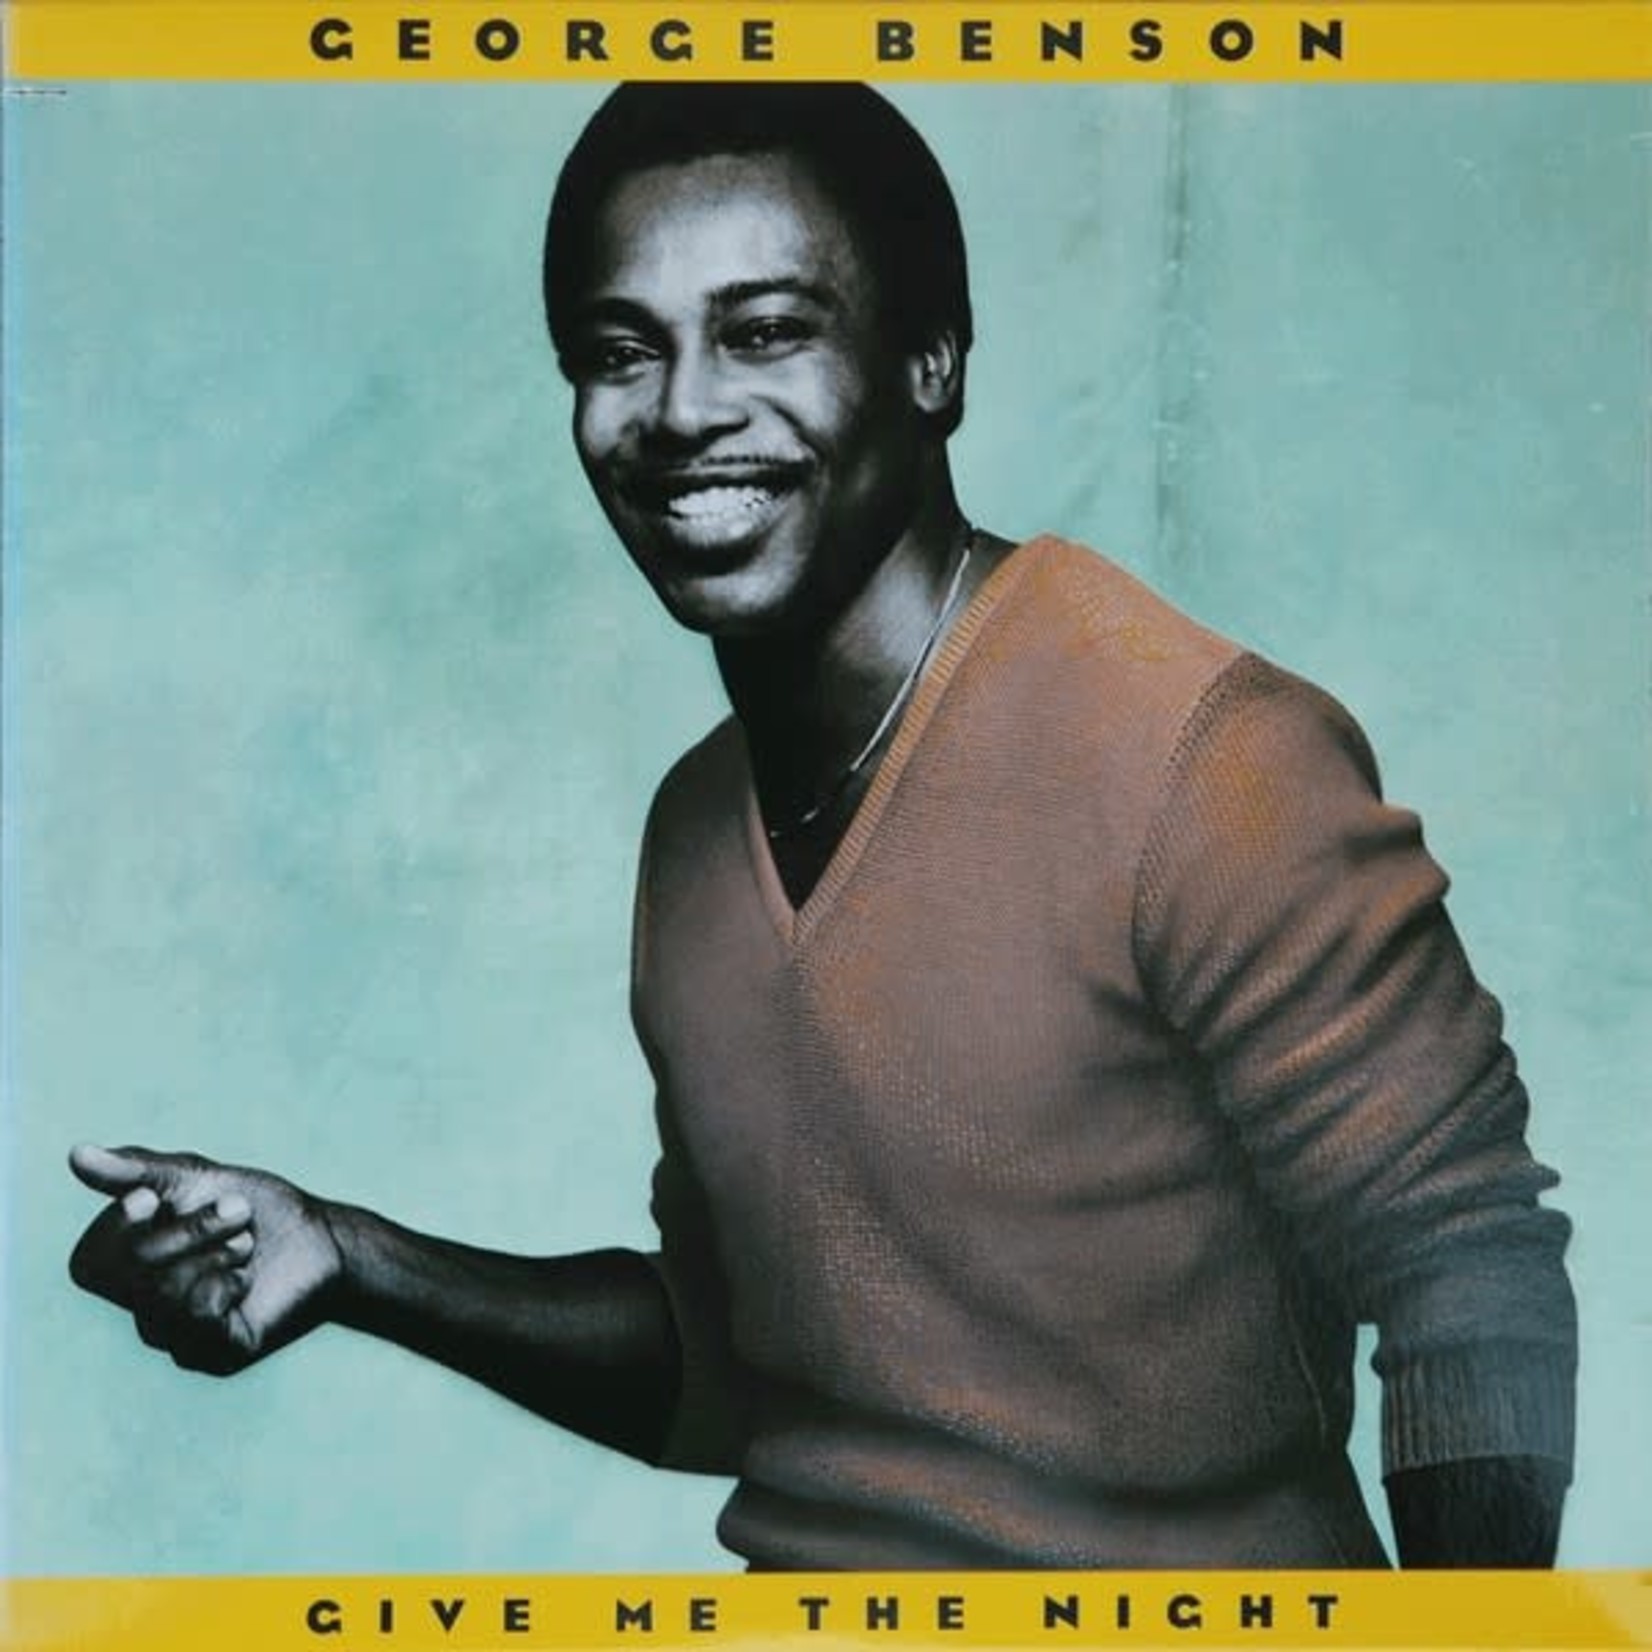 [Vintage] George Benson - Give Me the Night